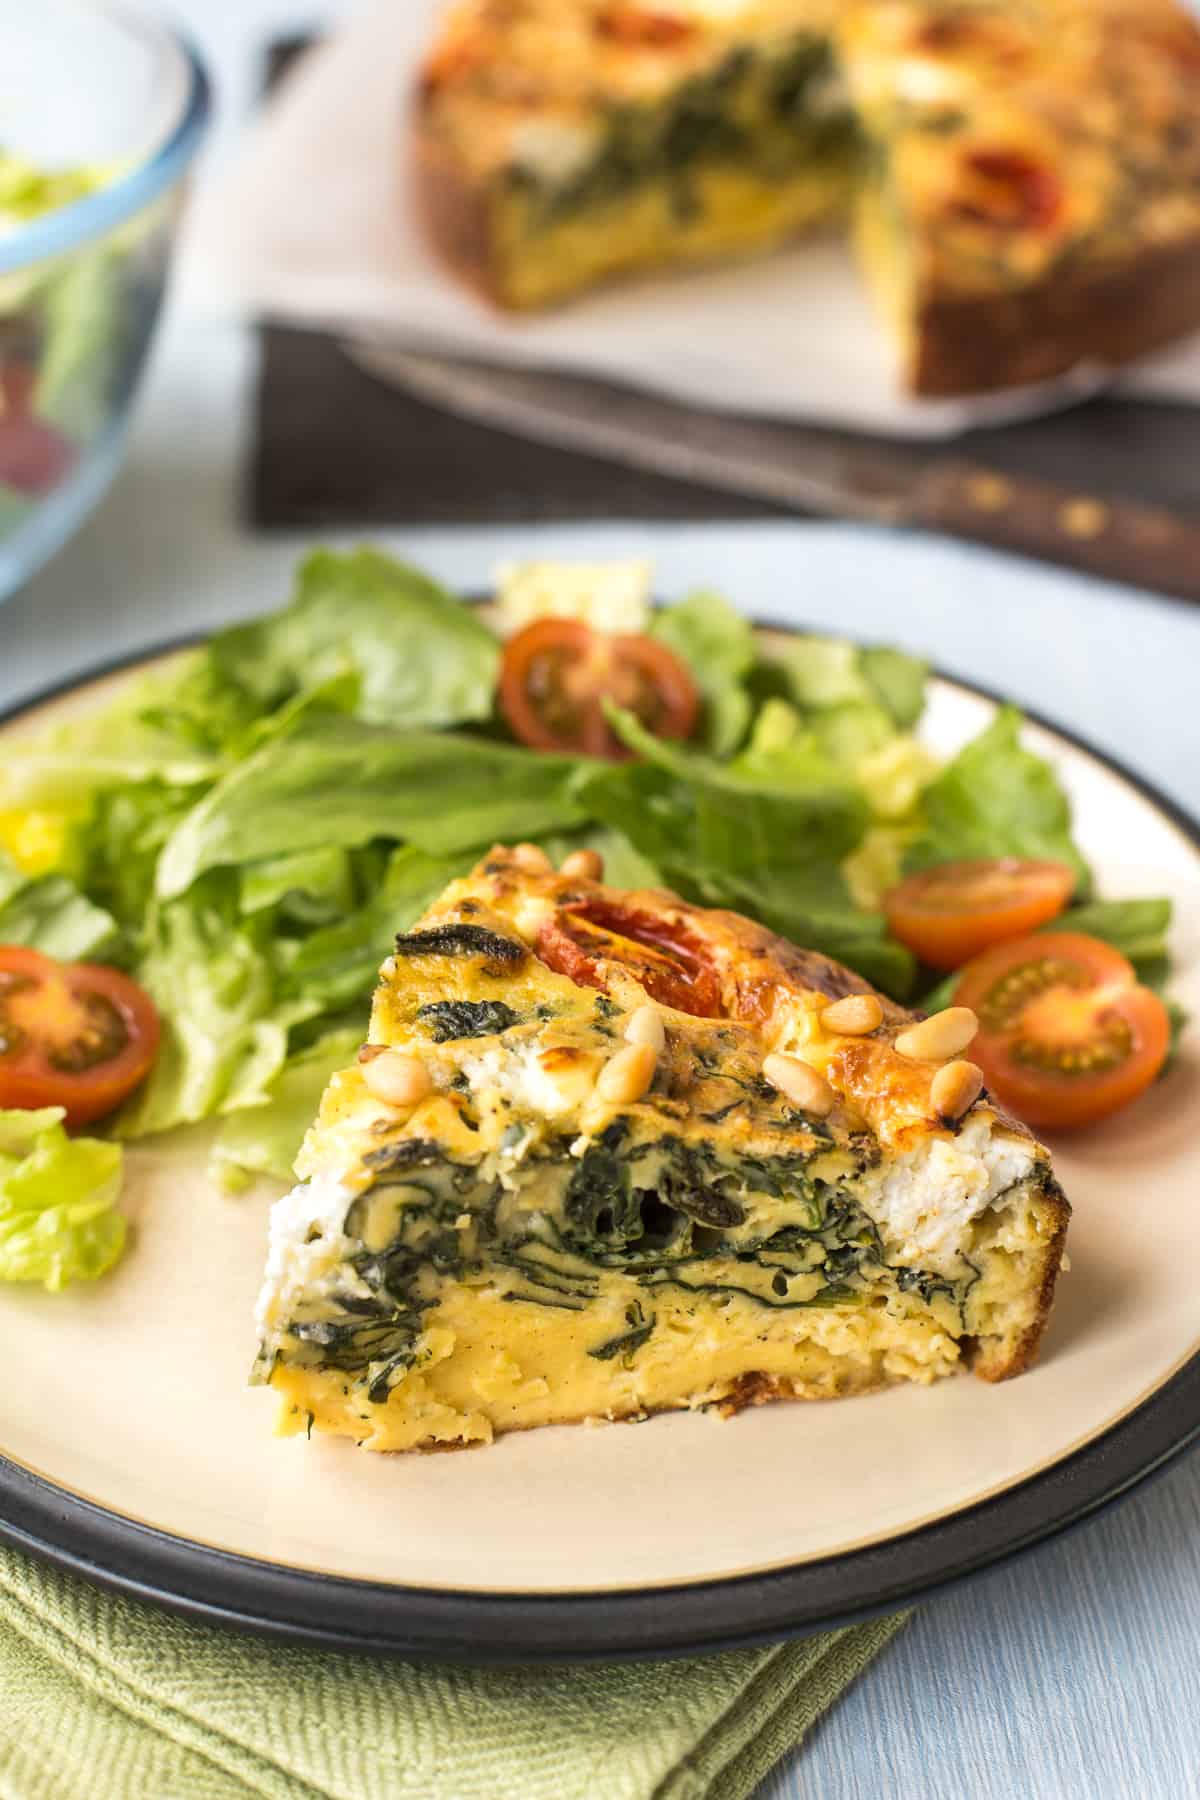 A slice of spinach and goat's cheese quiche on a plate with salad.